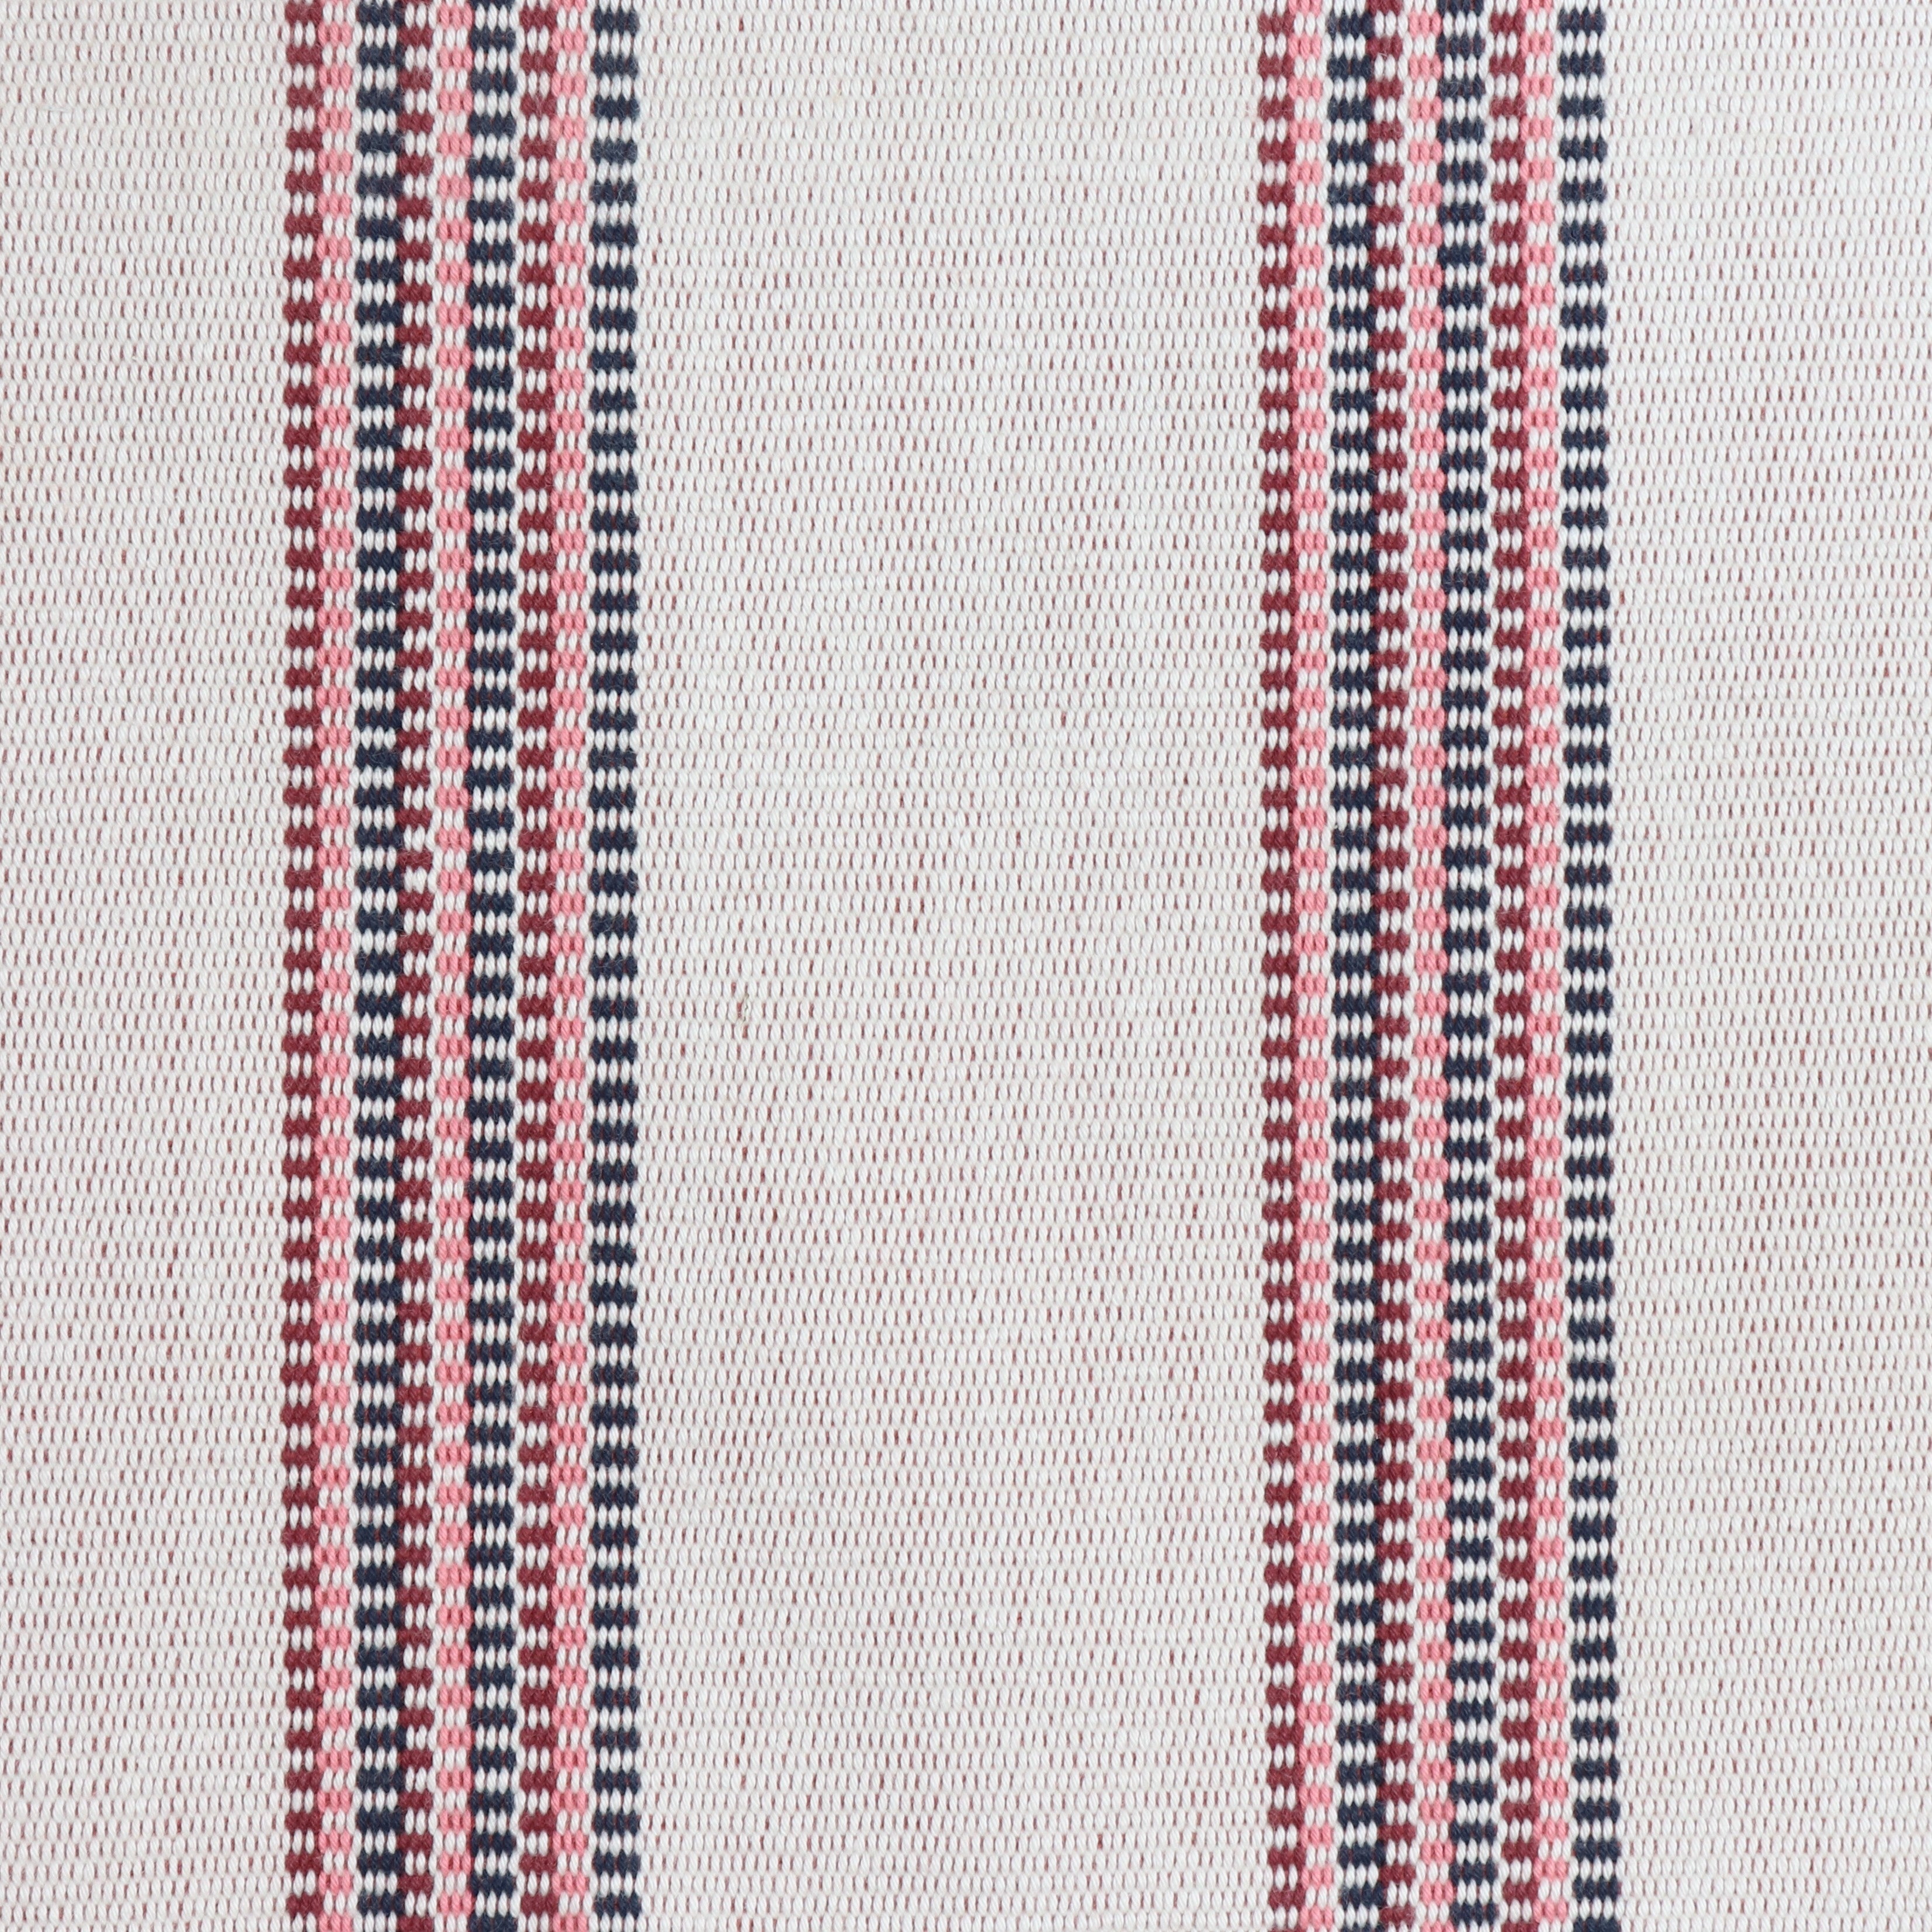 Detail of a hand-woven cotton fabric in an irregular stripe pattern in navy, red and pink on a white field.